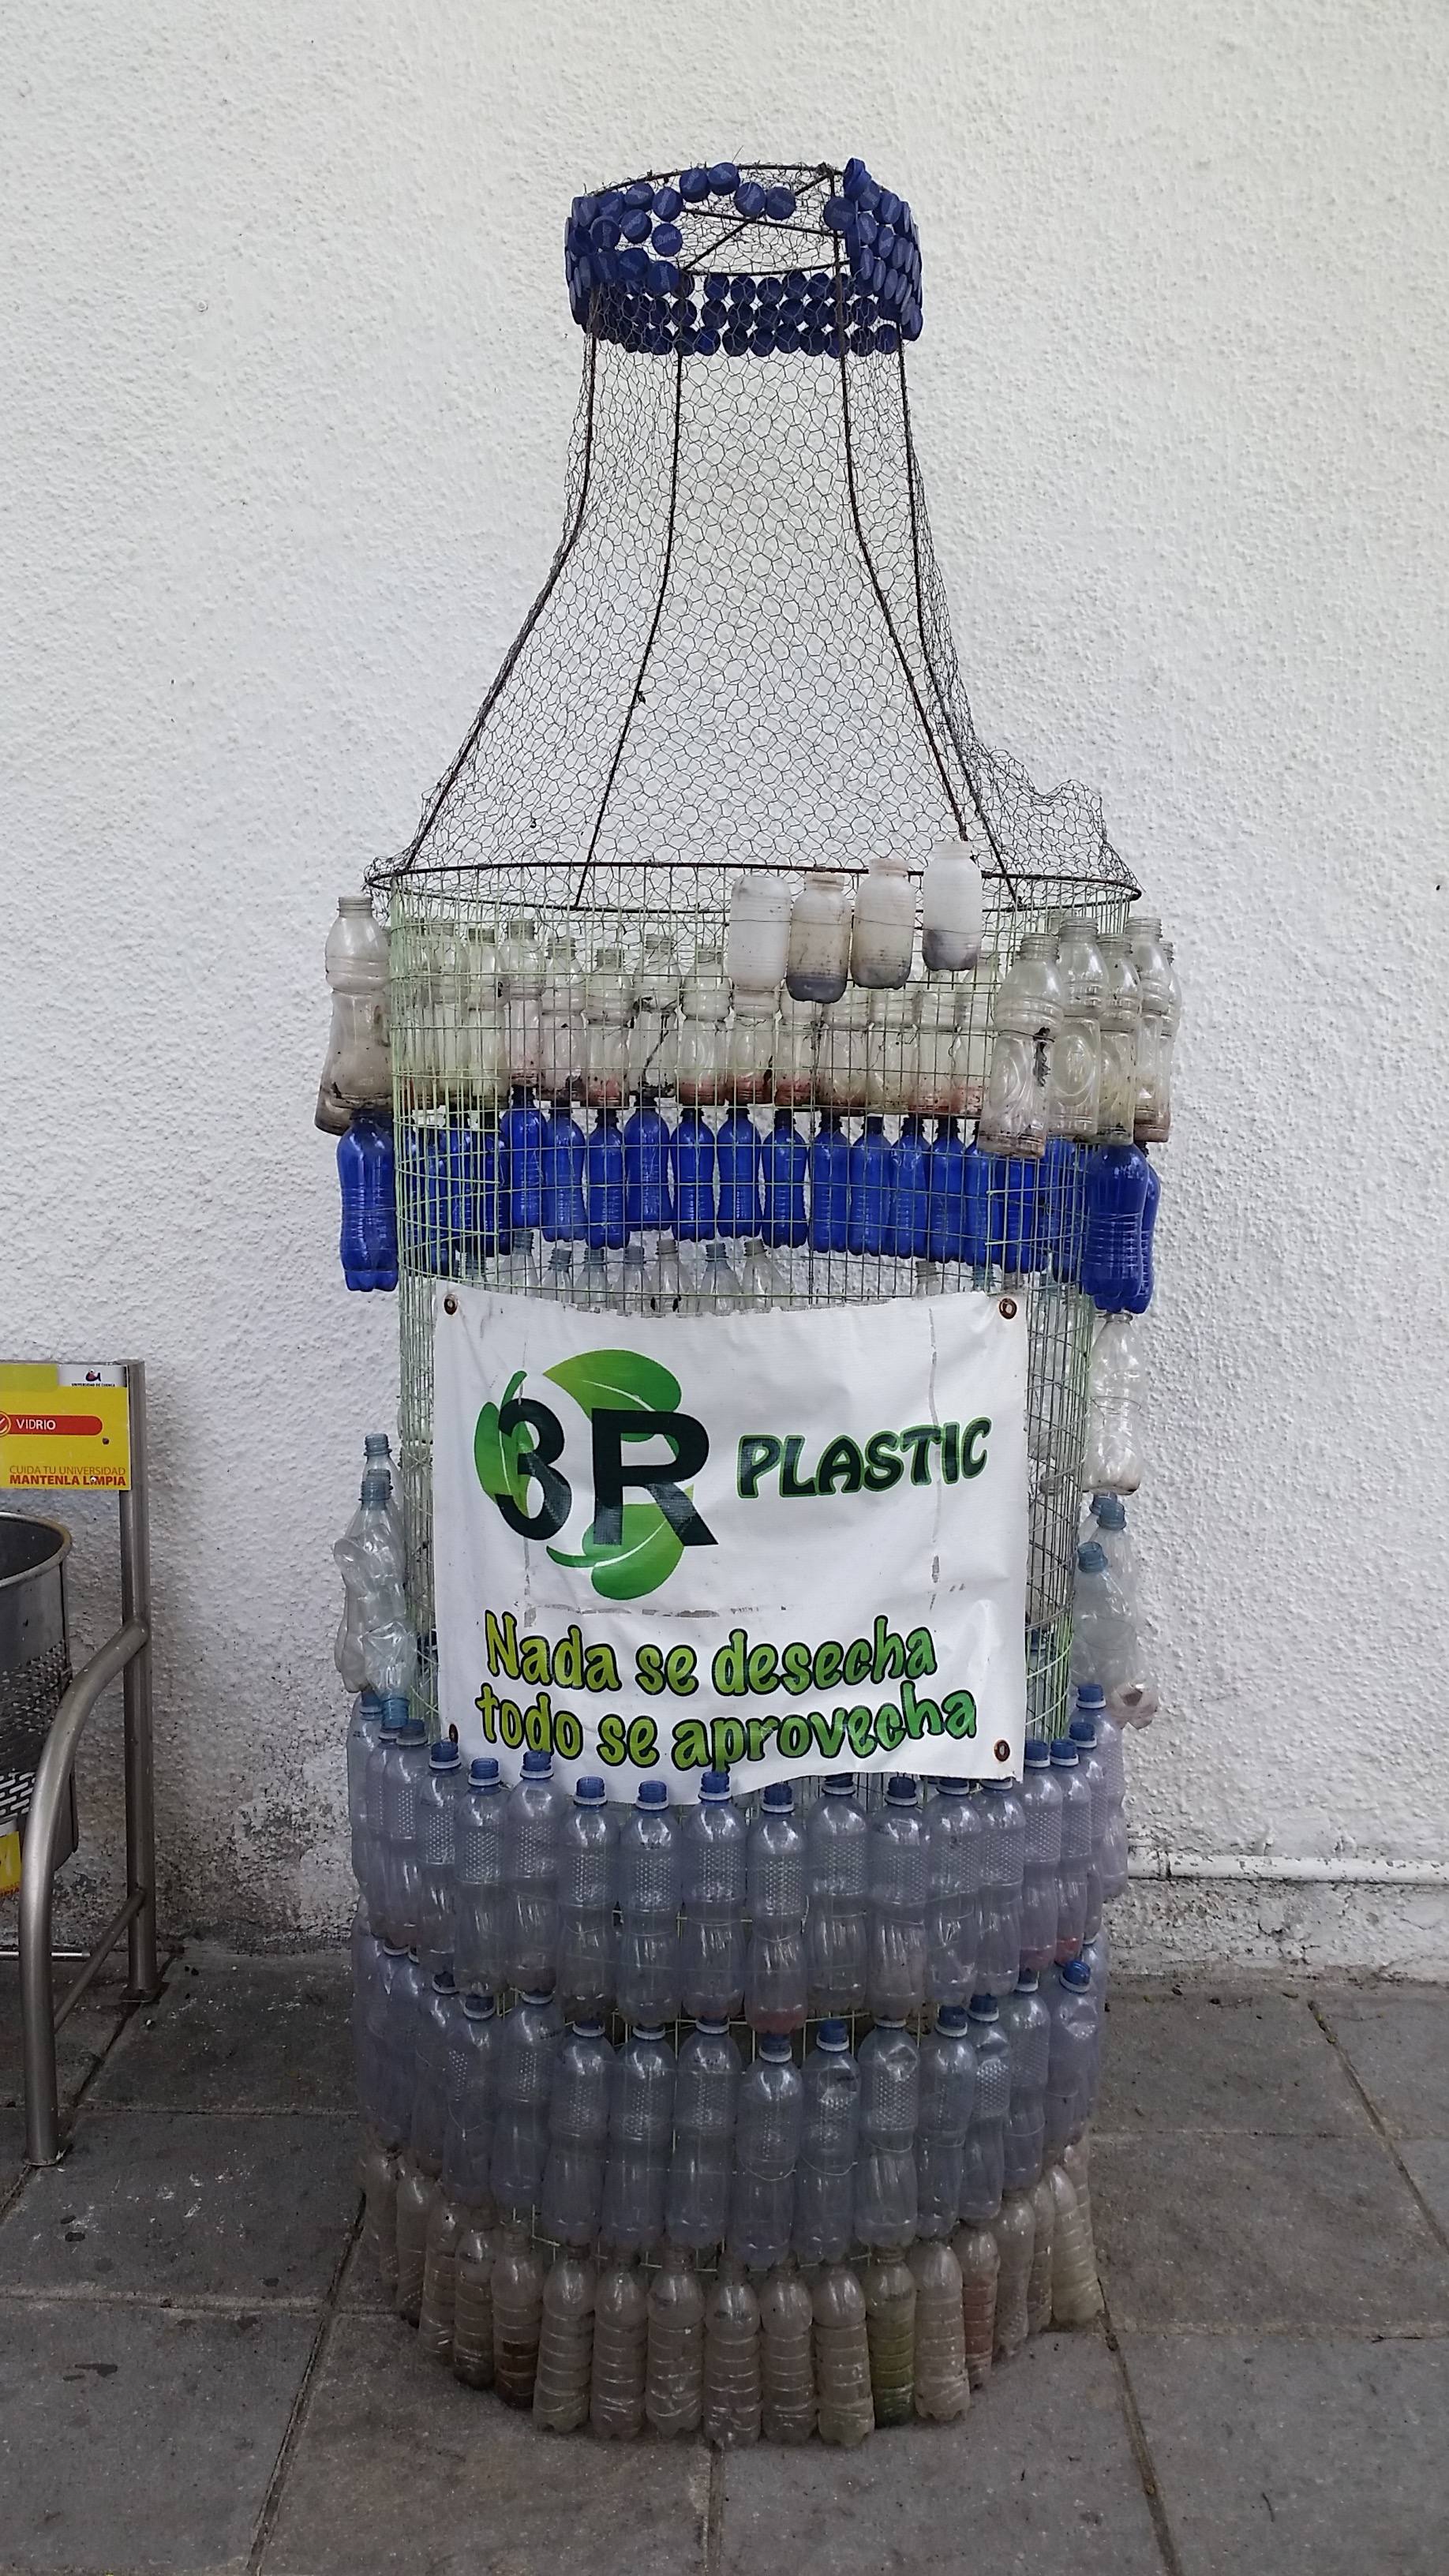 A recycling display at the local university!